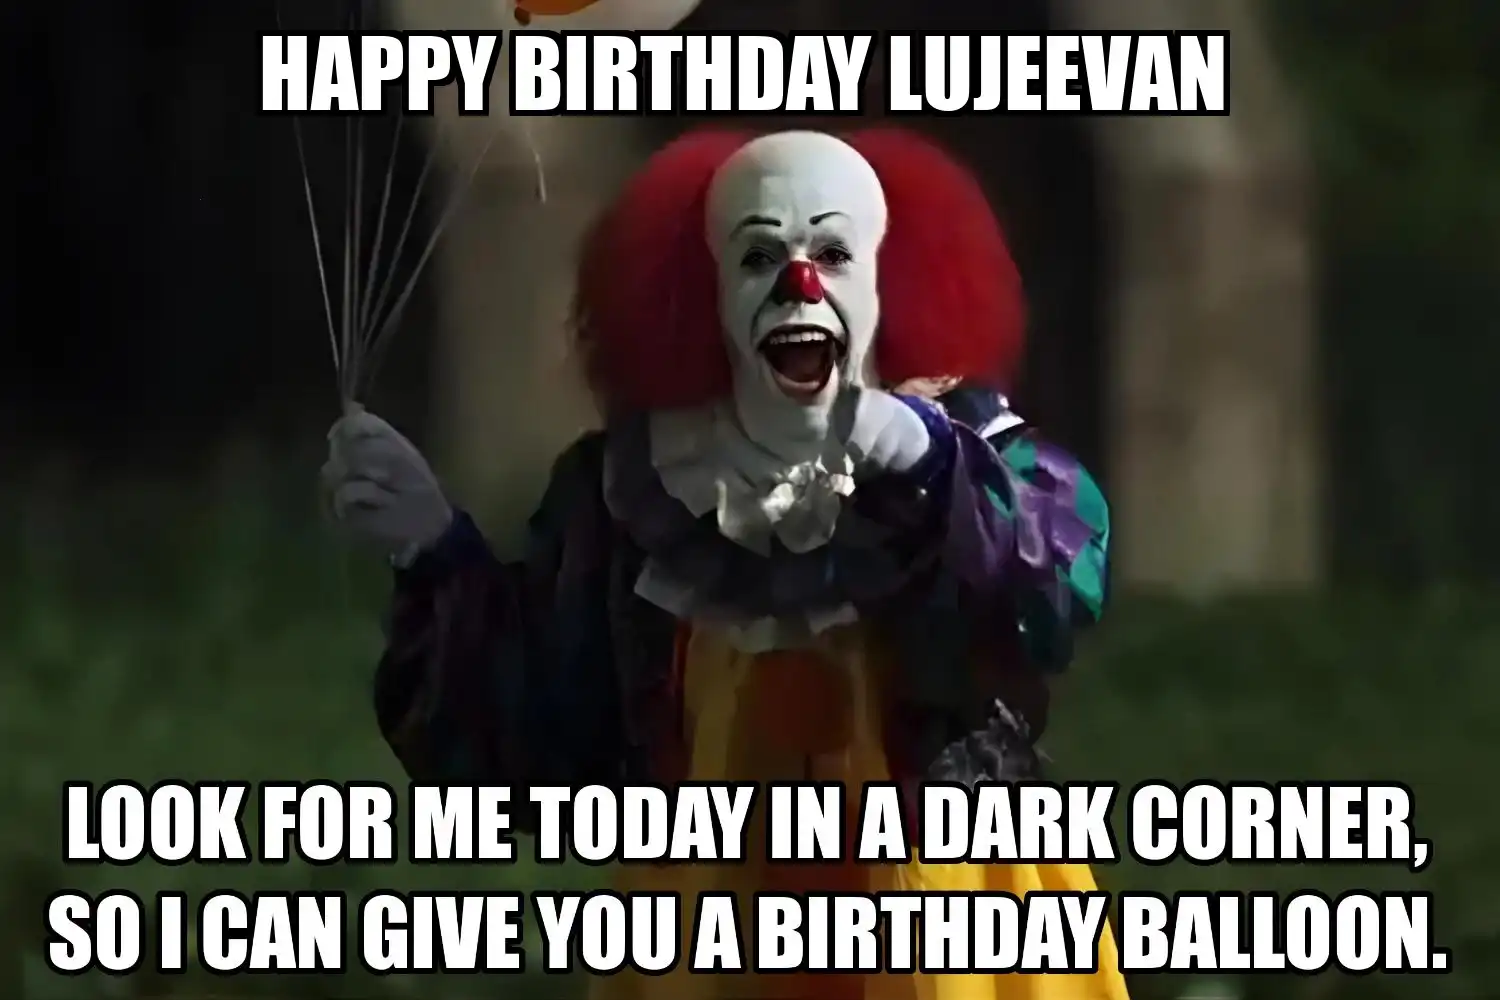 Happy Birthday Lujeevan I Can Give You A Balloon Meme